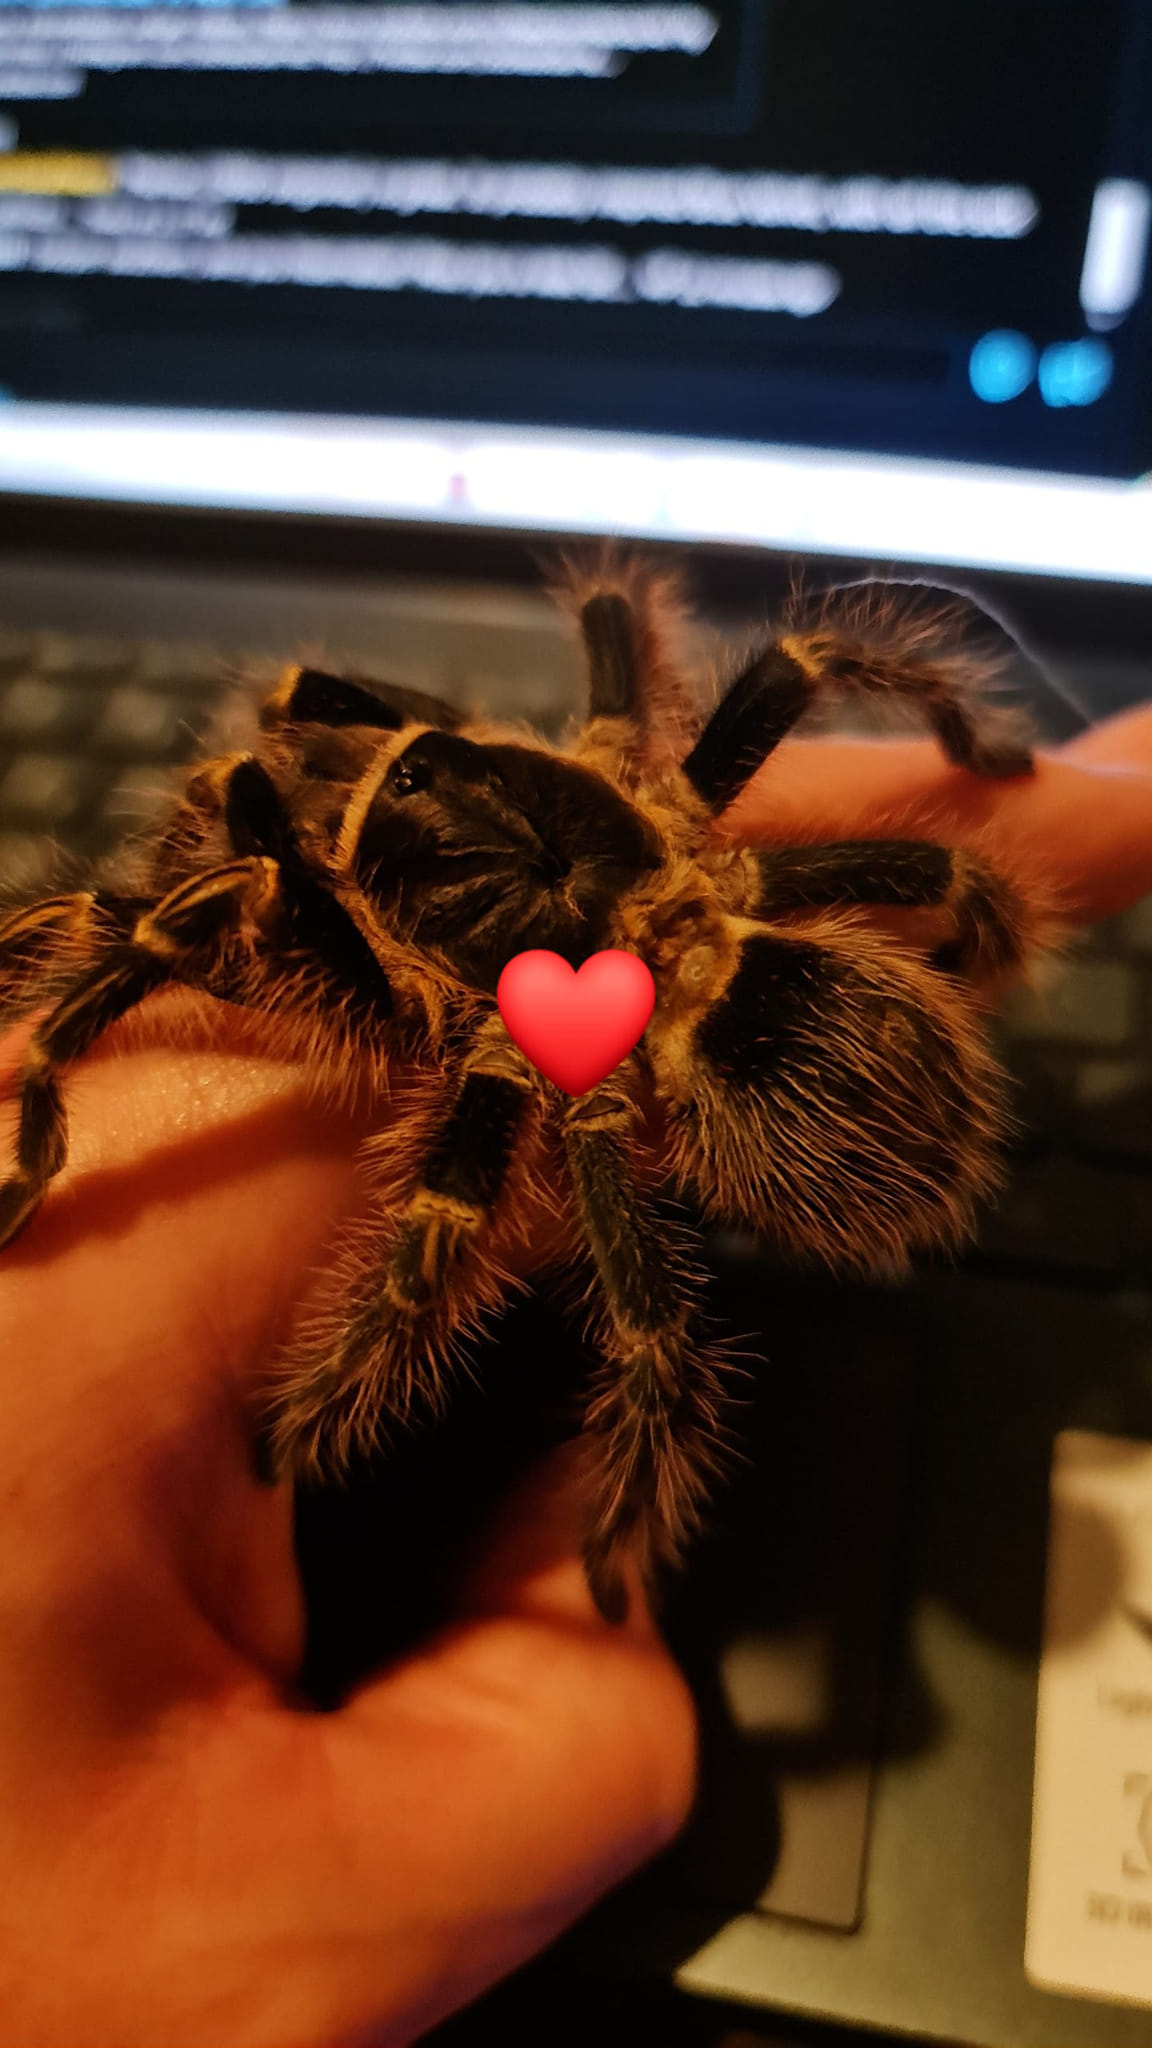 Bumble (G.Pulchripes)